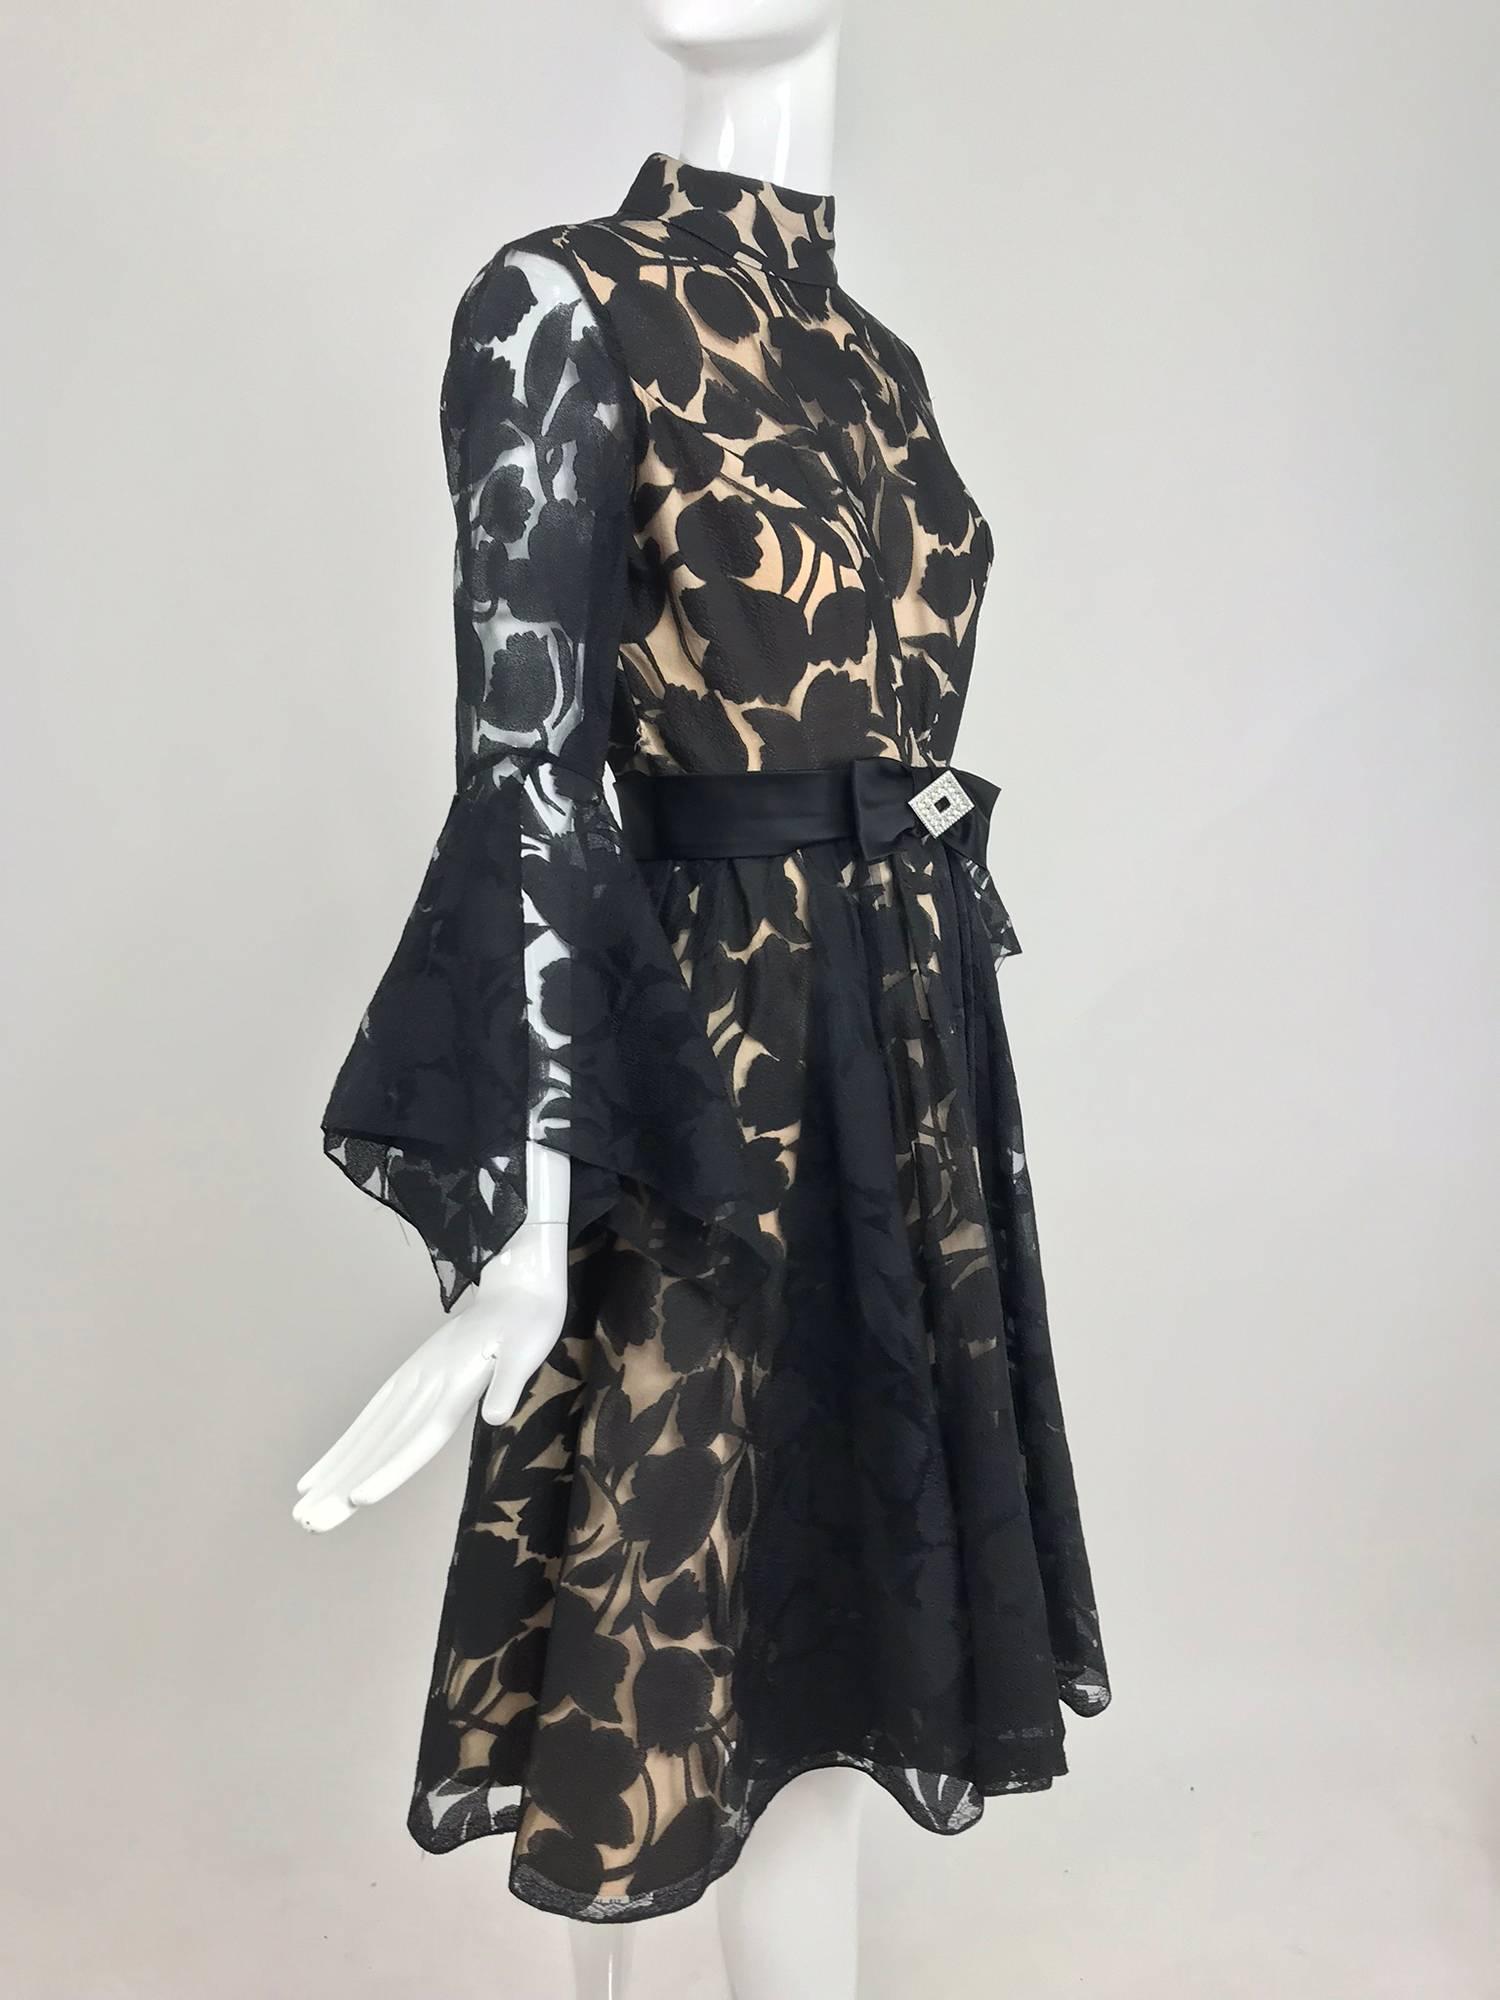 Black and nude voided organza handkerchief sleeve dress from the early 1960s...Dressmaker made this beautiful cocktail dress features a banded collar, fitted bodice and long sleeves with dramatic handkerchief cuffs...Seamed waist with a flared skirt